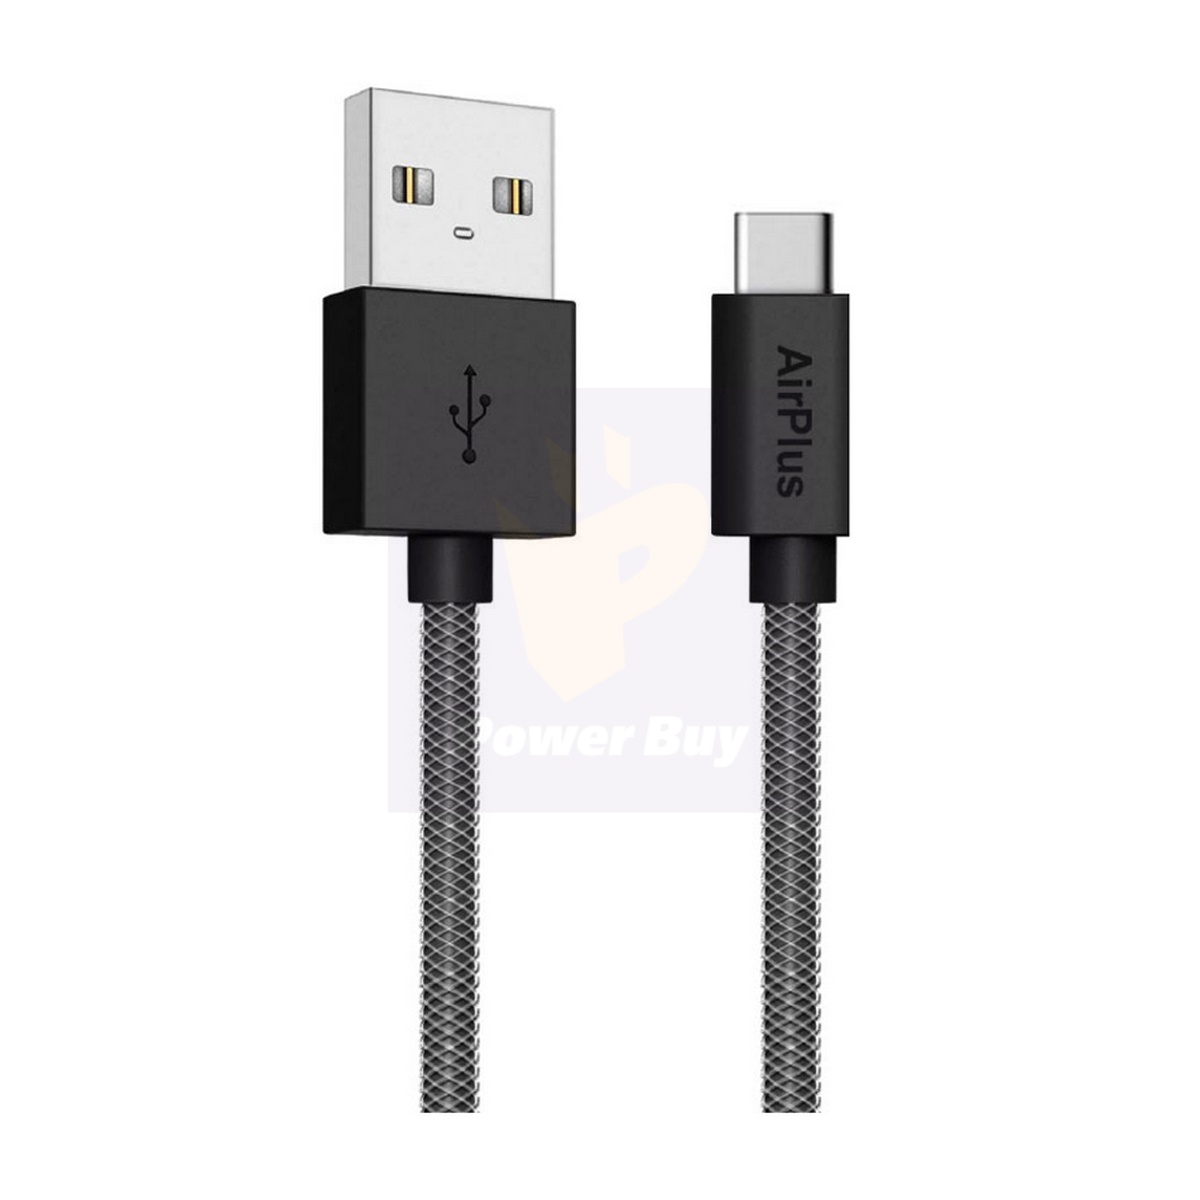 What is USB-C? How to select a most suitable USB Type-C charger?